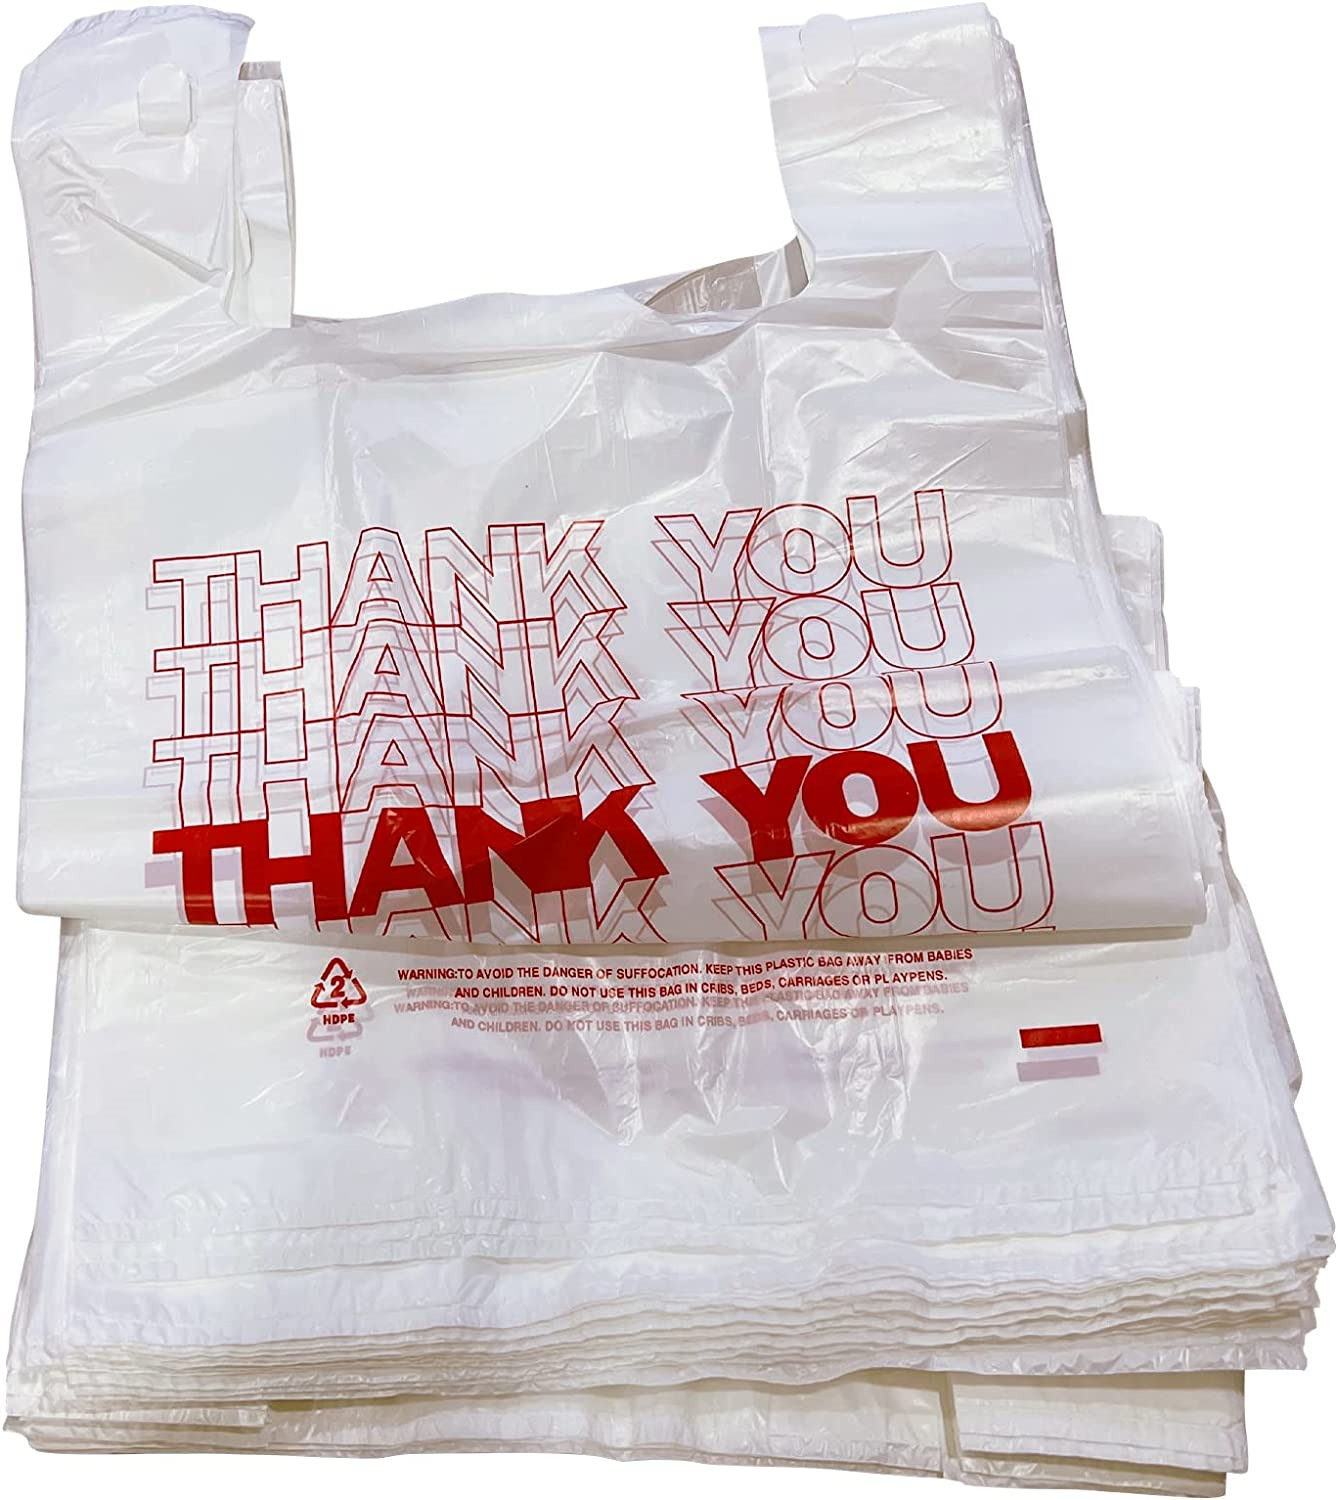 Tashibox Shopping Thank Reusable And Disposable Grocery Bags Measures 11.5" X X